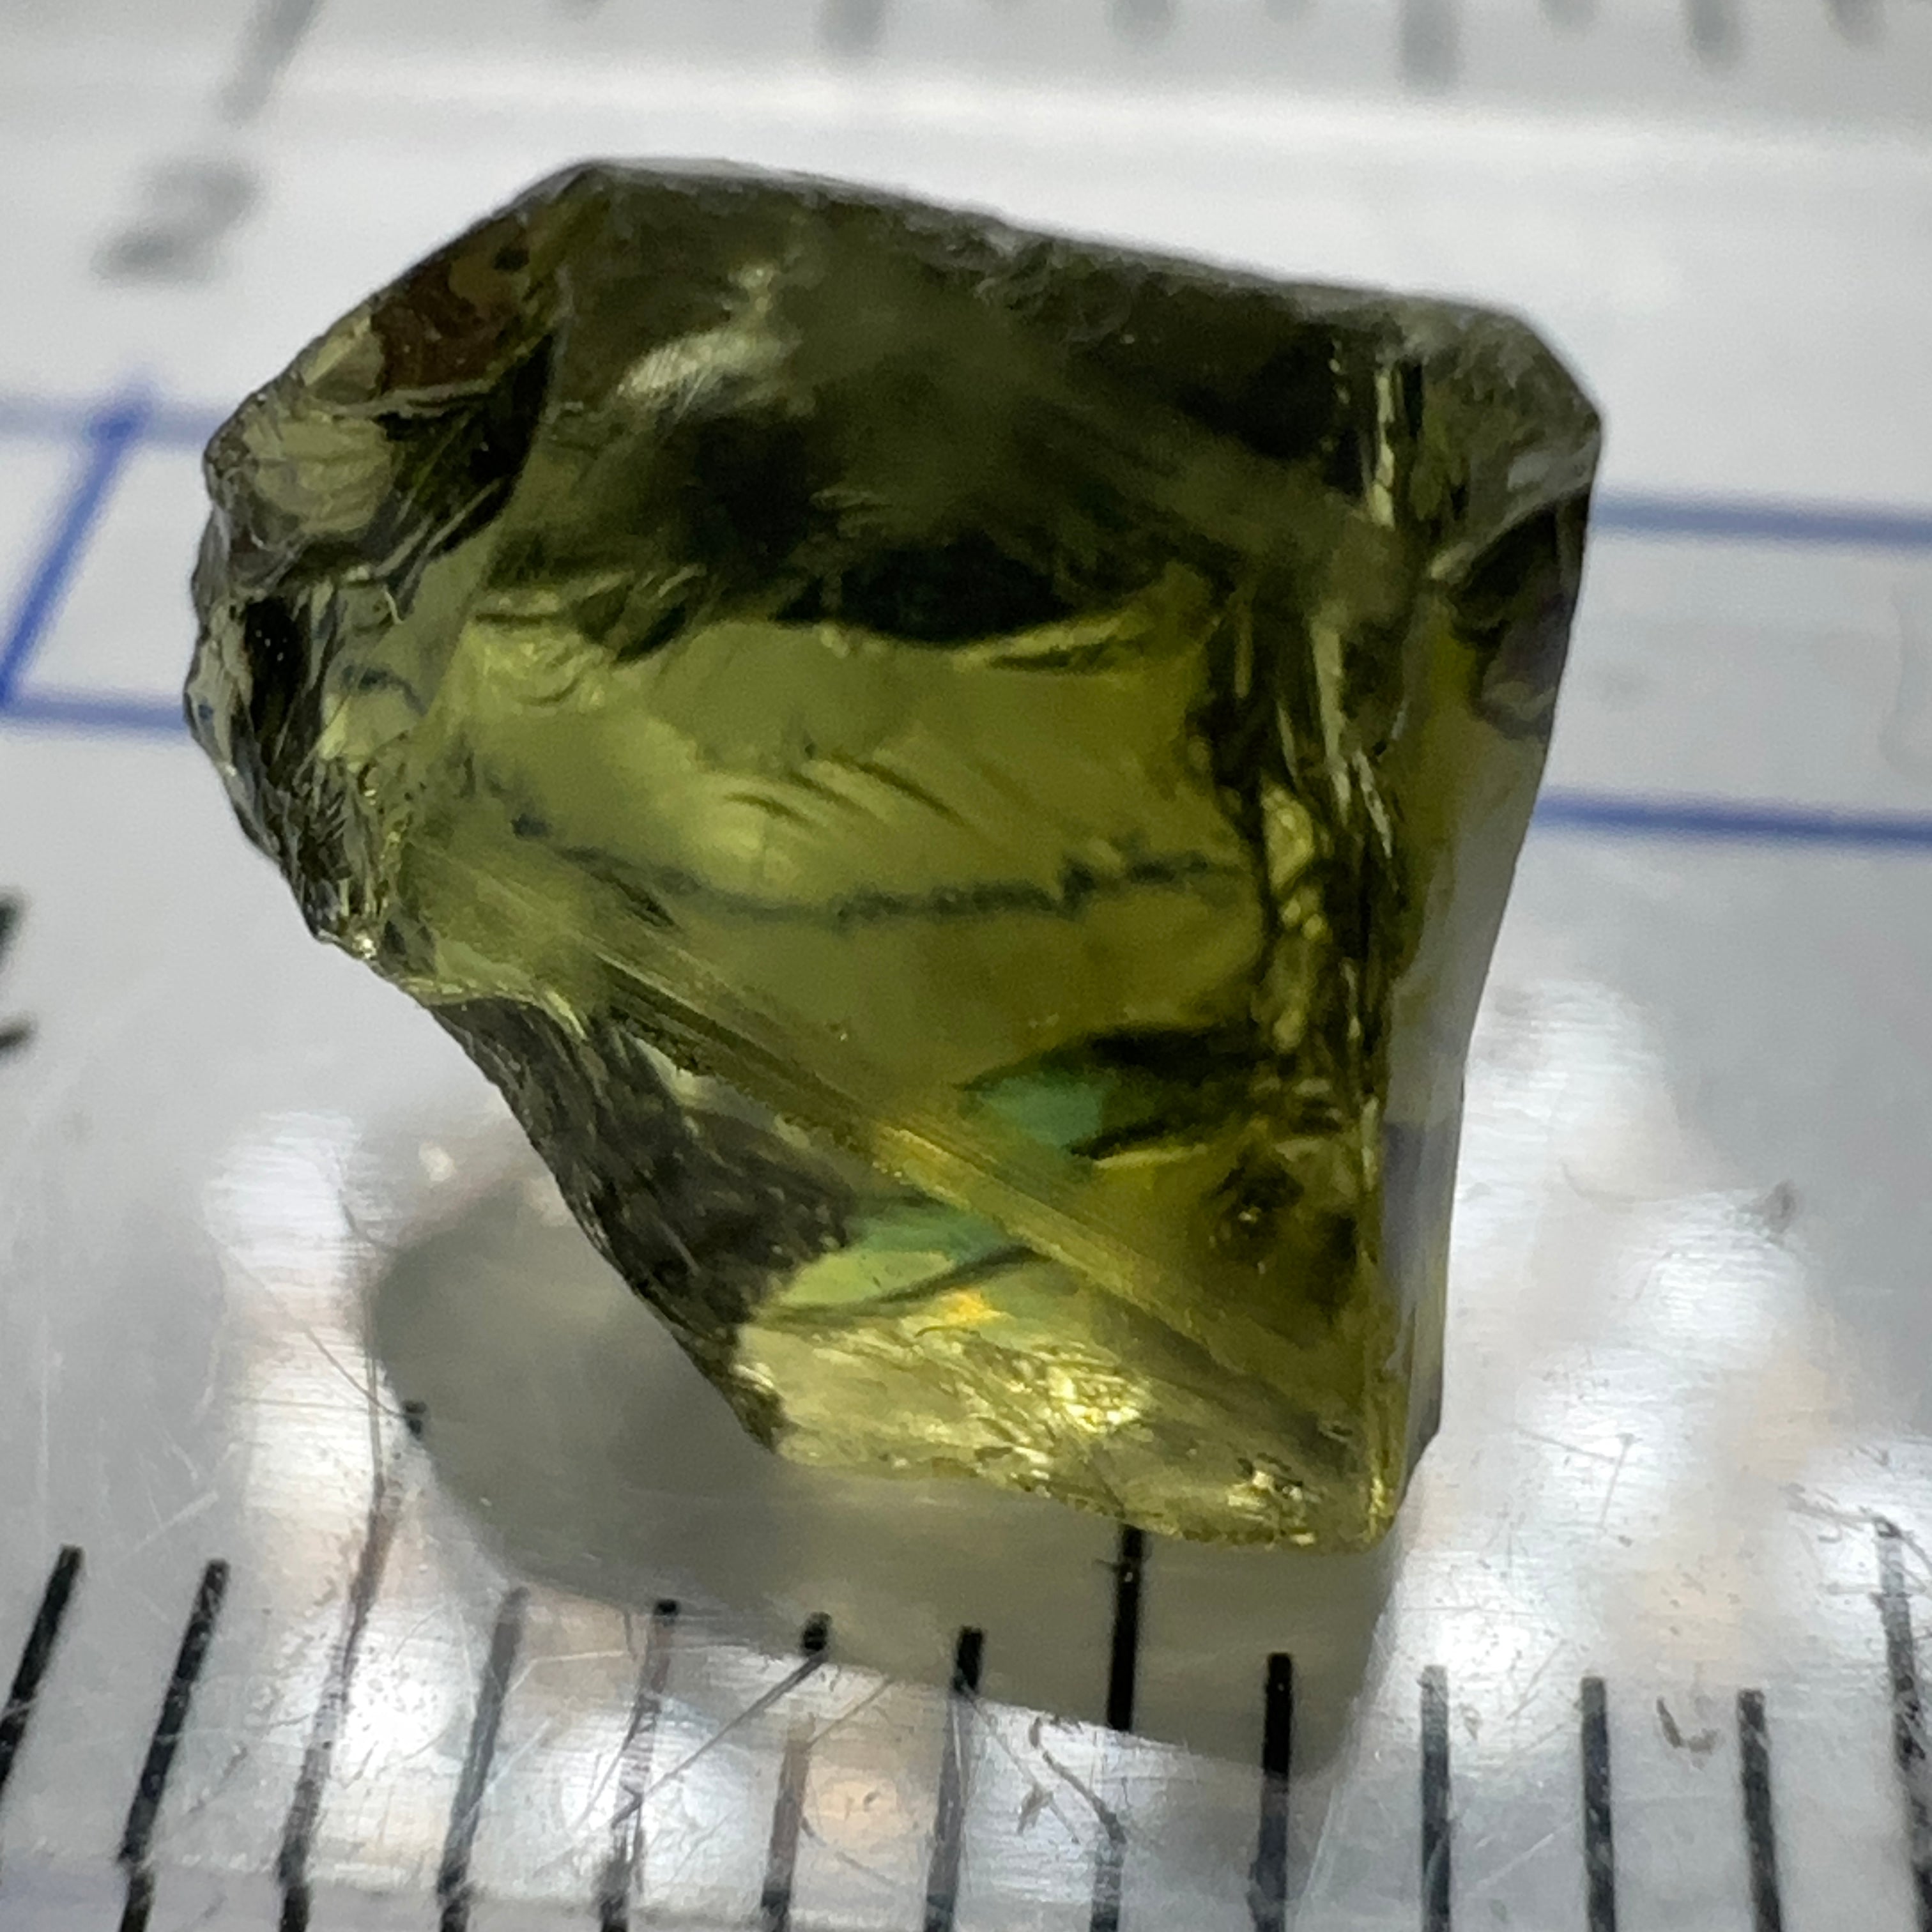 2.89ct Mozambique Tourmaline, VVS-IF, Untreated Unheated. Clean.